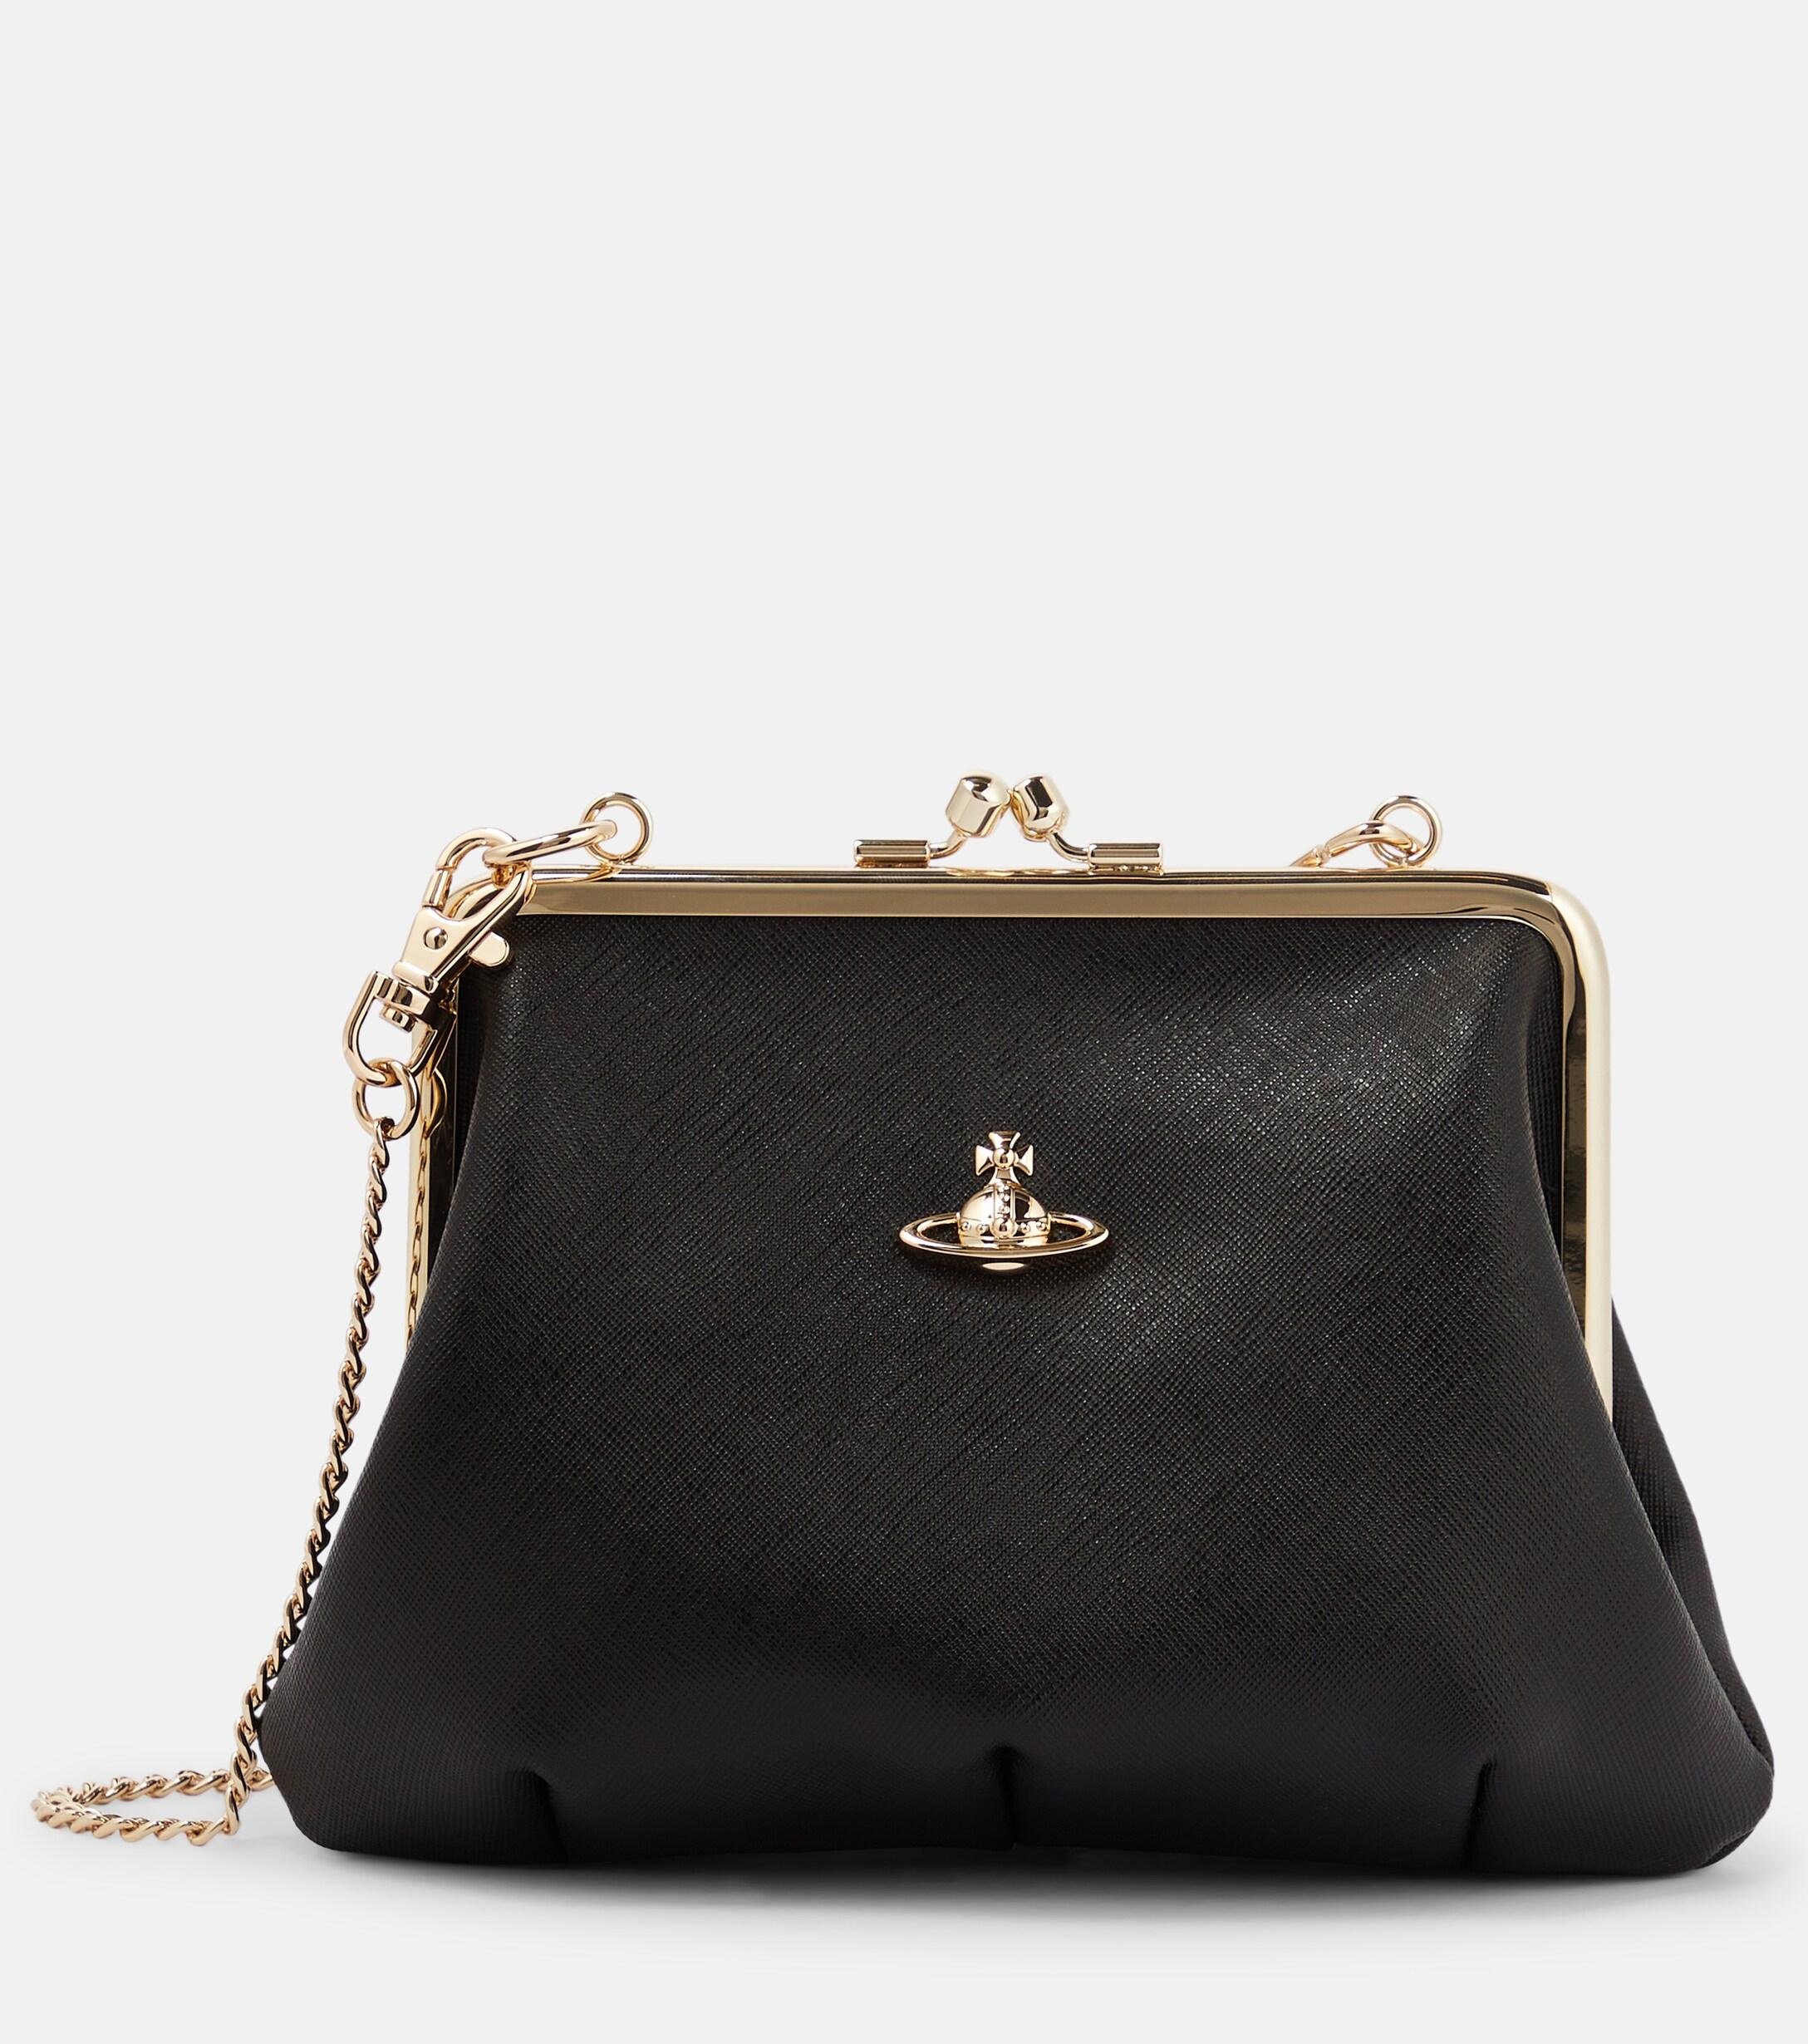 Vivienne Westwood Granny Frame Leather Clutch in Black | Lyst Canada